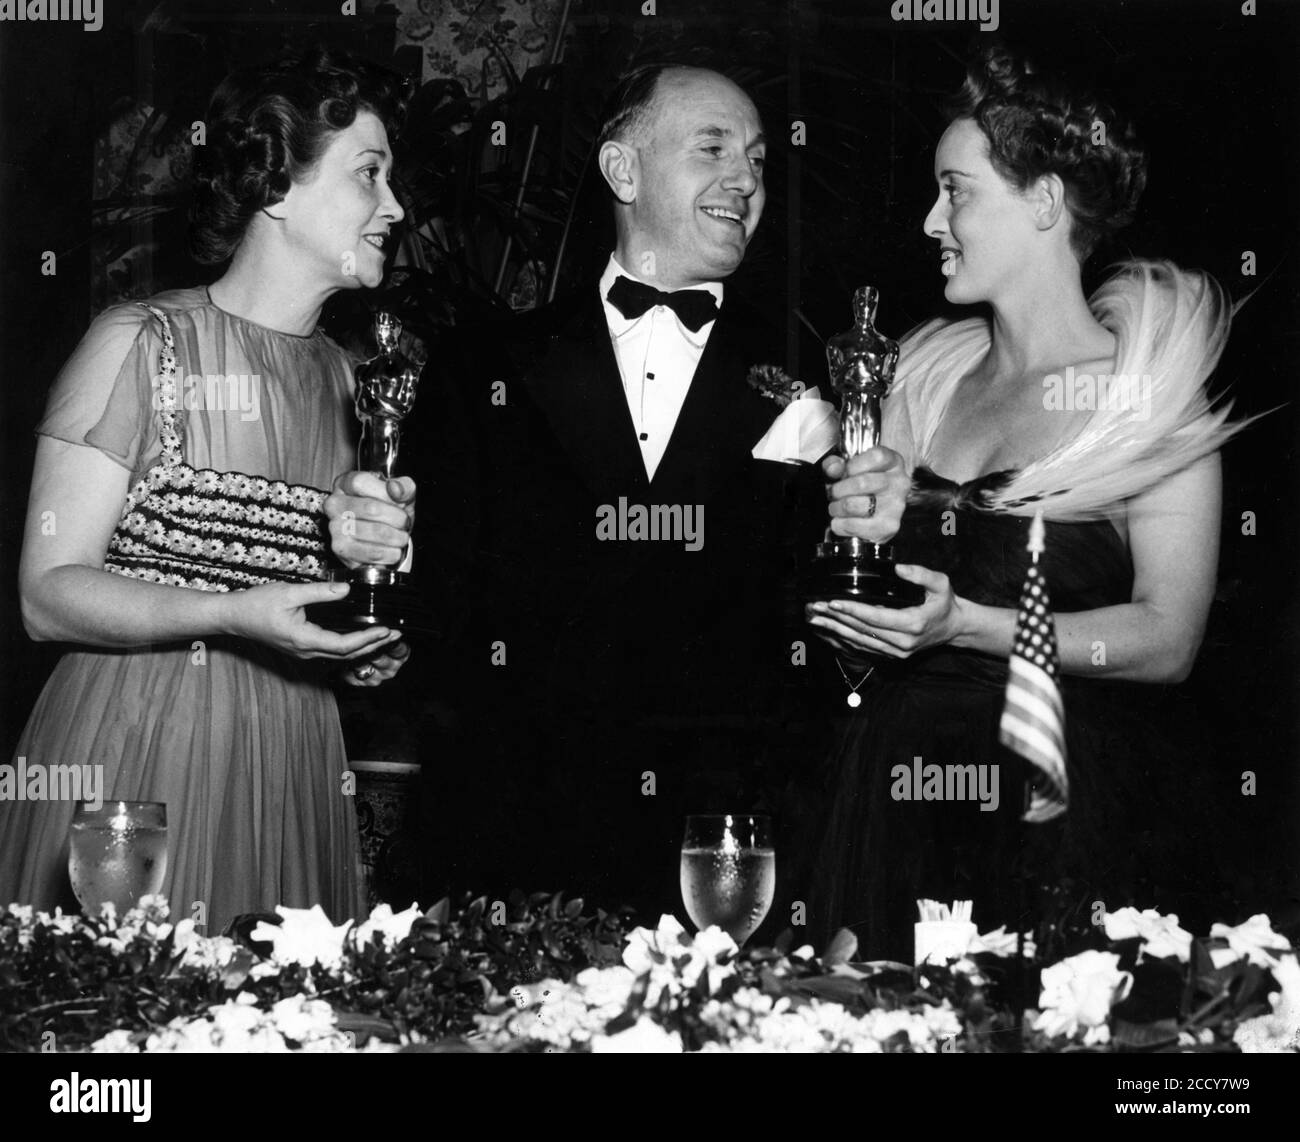 FAY BAINTER with her Best Supporting Actress Oscar for JEZEBEL and BETTE DAVIS holding her  Oscar for Best Actress of 1938 for JEZEBEL at the 1939 Academy Award ceremony at the Biltmore Hotel in Los Angeles February 23rd 1939 with their boss JACK L. WARNER Warner Bros. Vice - President in Charge of Production Stock Photo